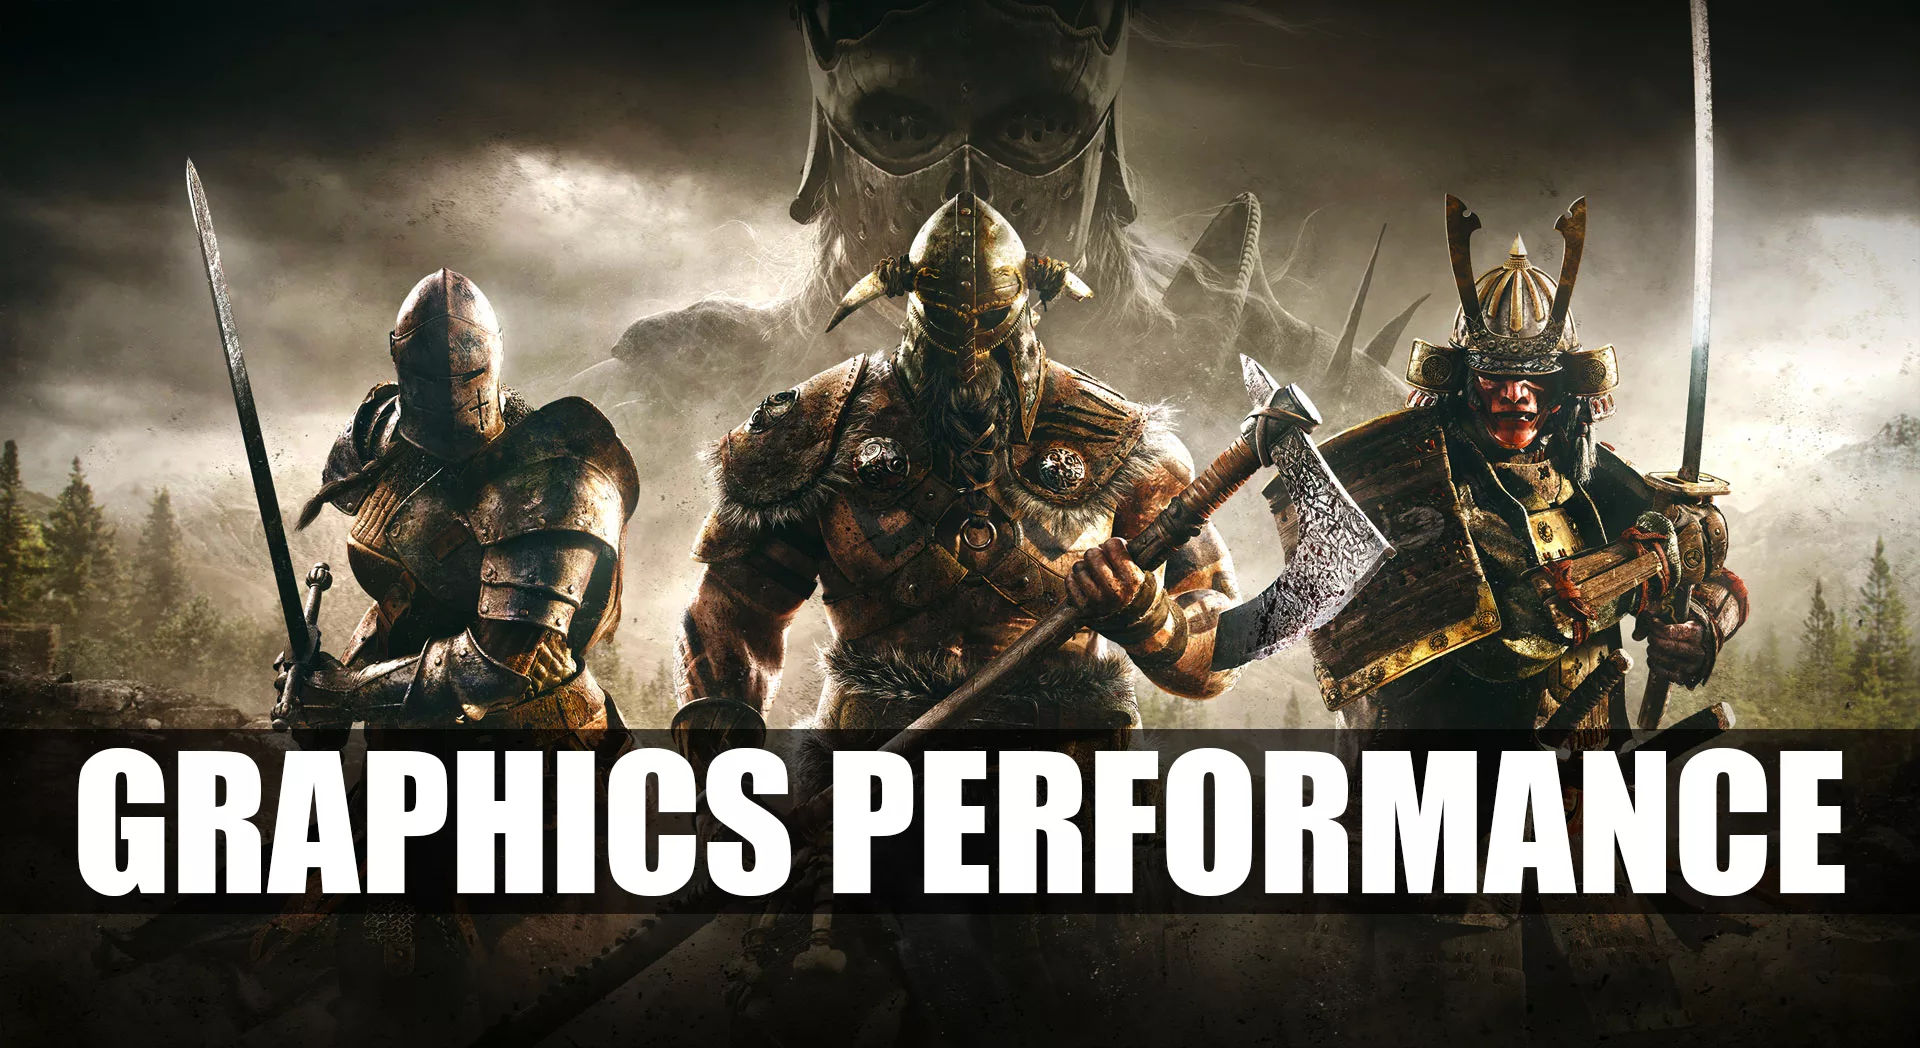 For-Honor-Graphics-Performance-1